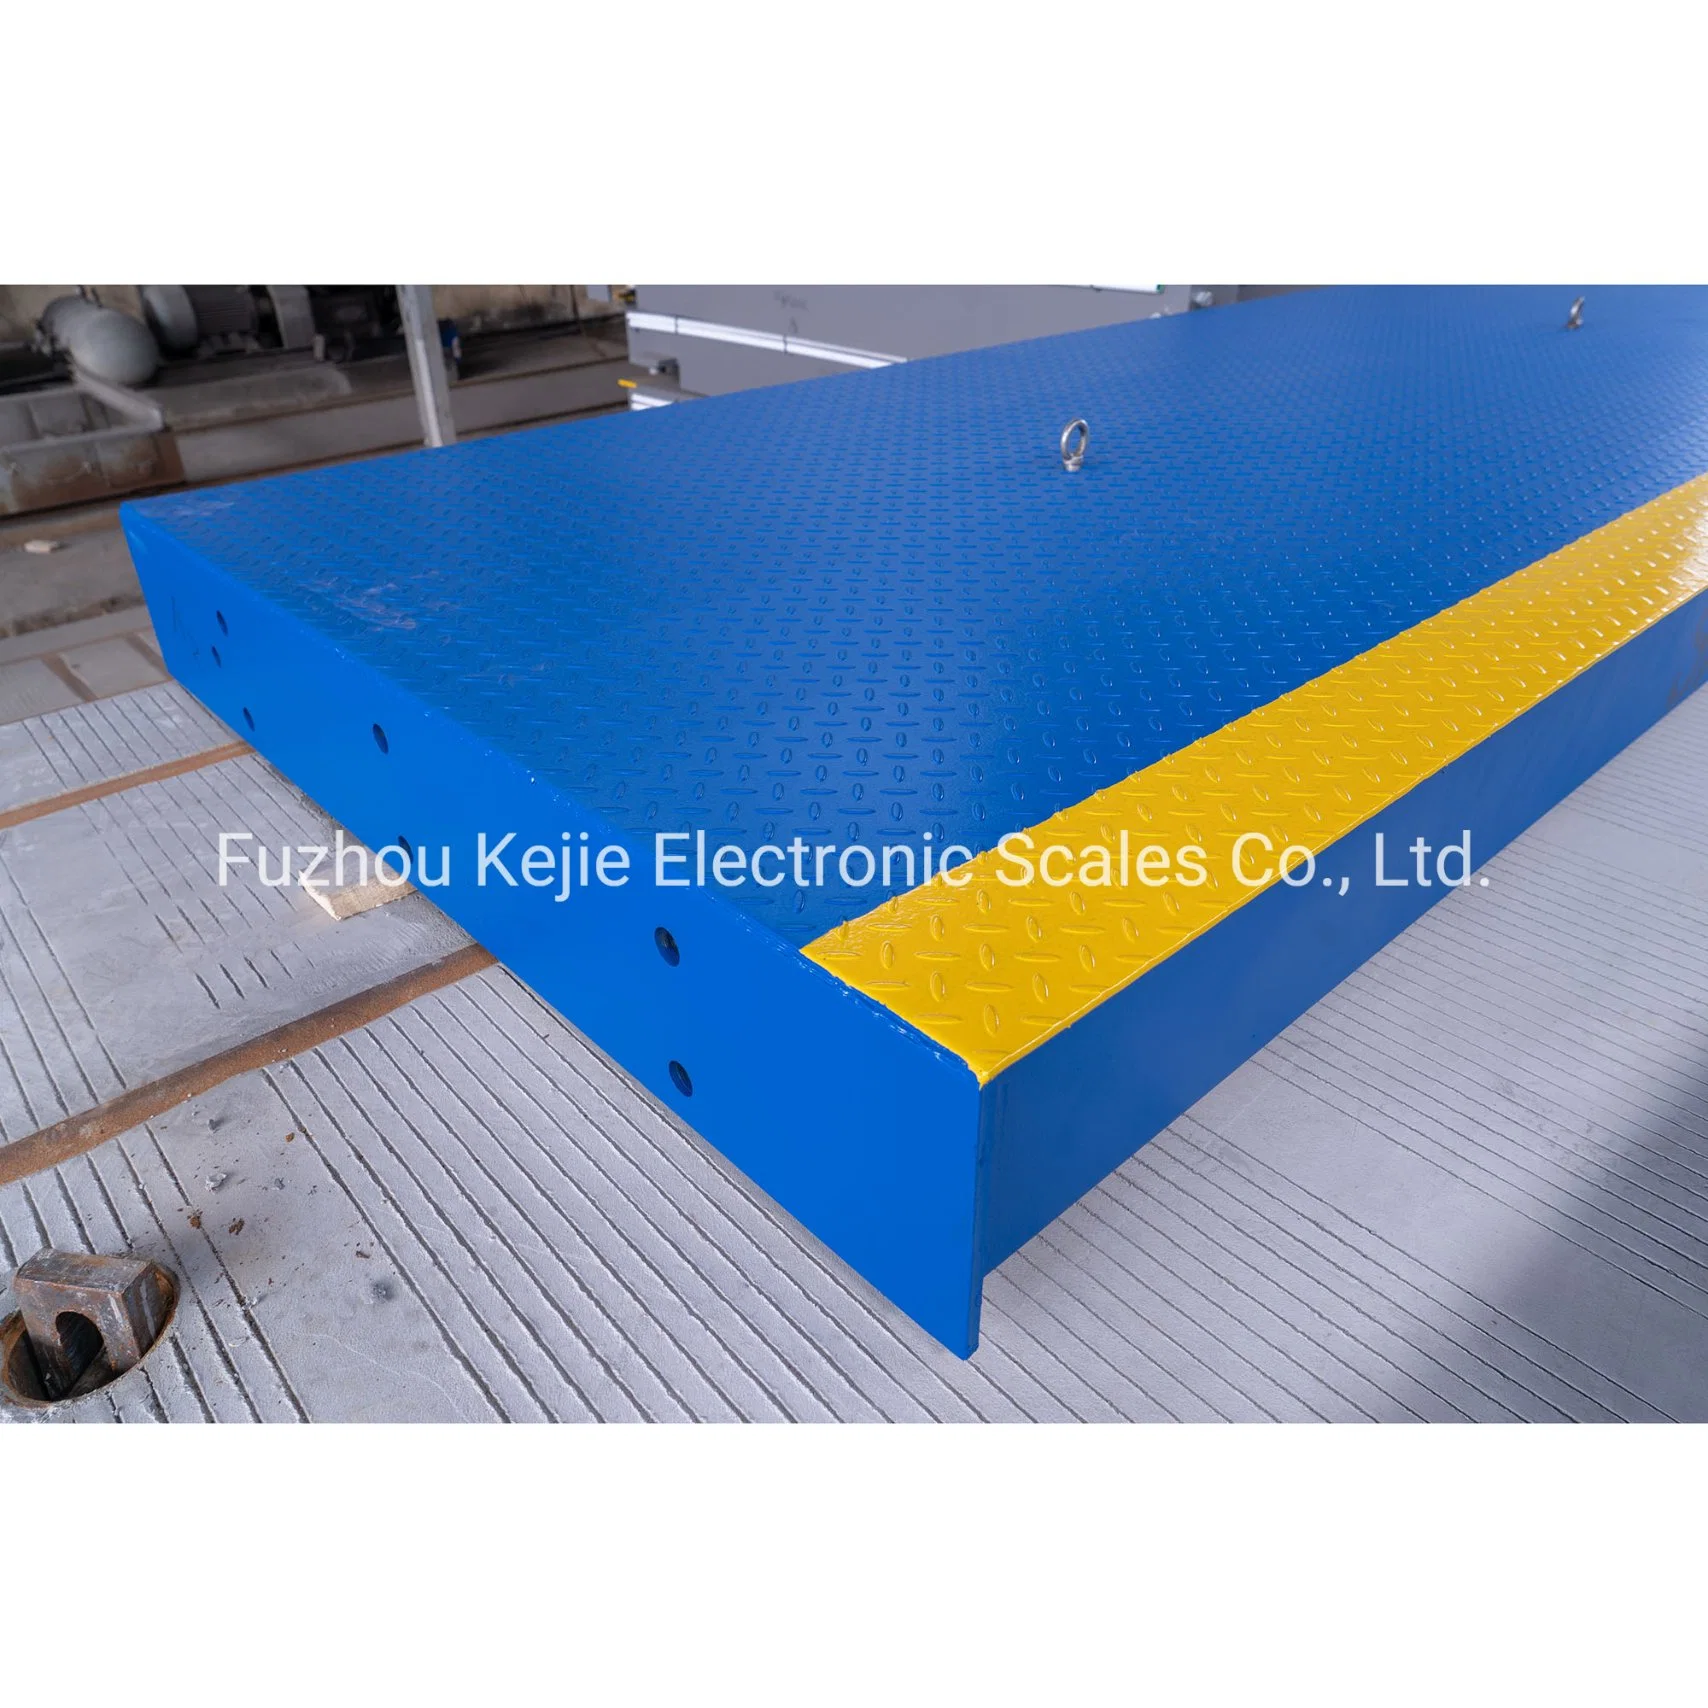 China Kejie Weighing Factory 60t 3X 16m Digital Heavy Duty Weighbridge /Truck Scale with Load Caell and Weighing Indicator for Export